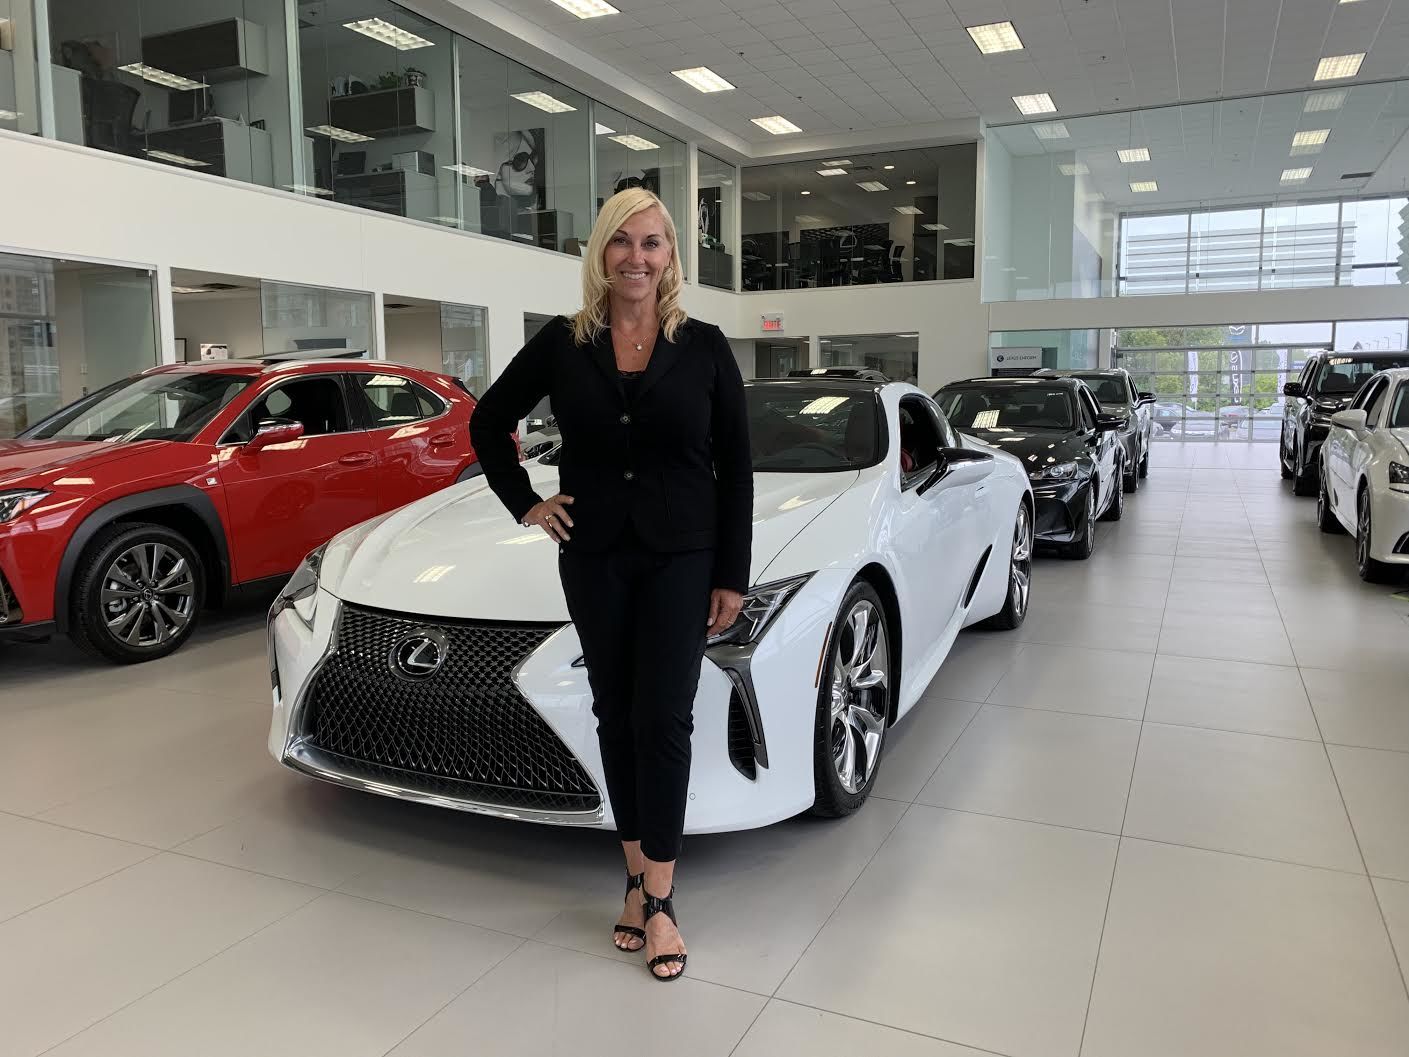 We Are Proud to Announce Our Collaboration with Chantal Machabée for Lexus Laval!